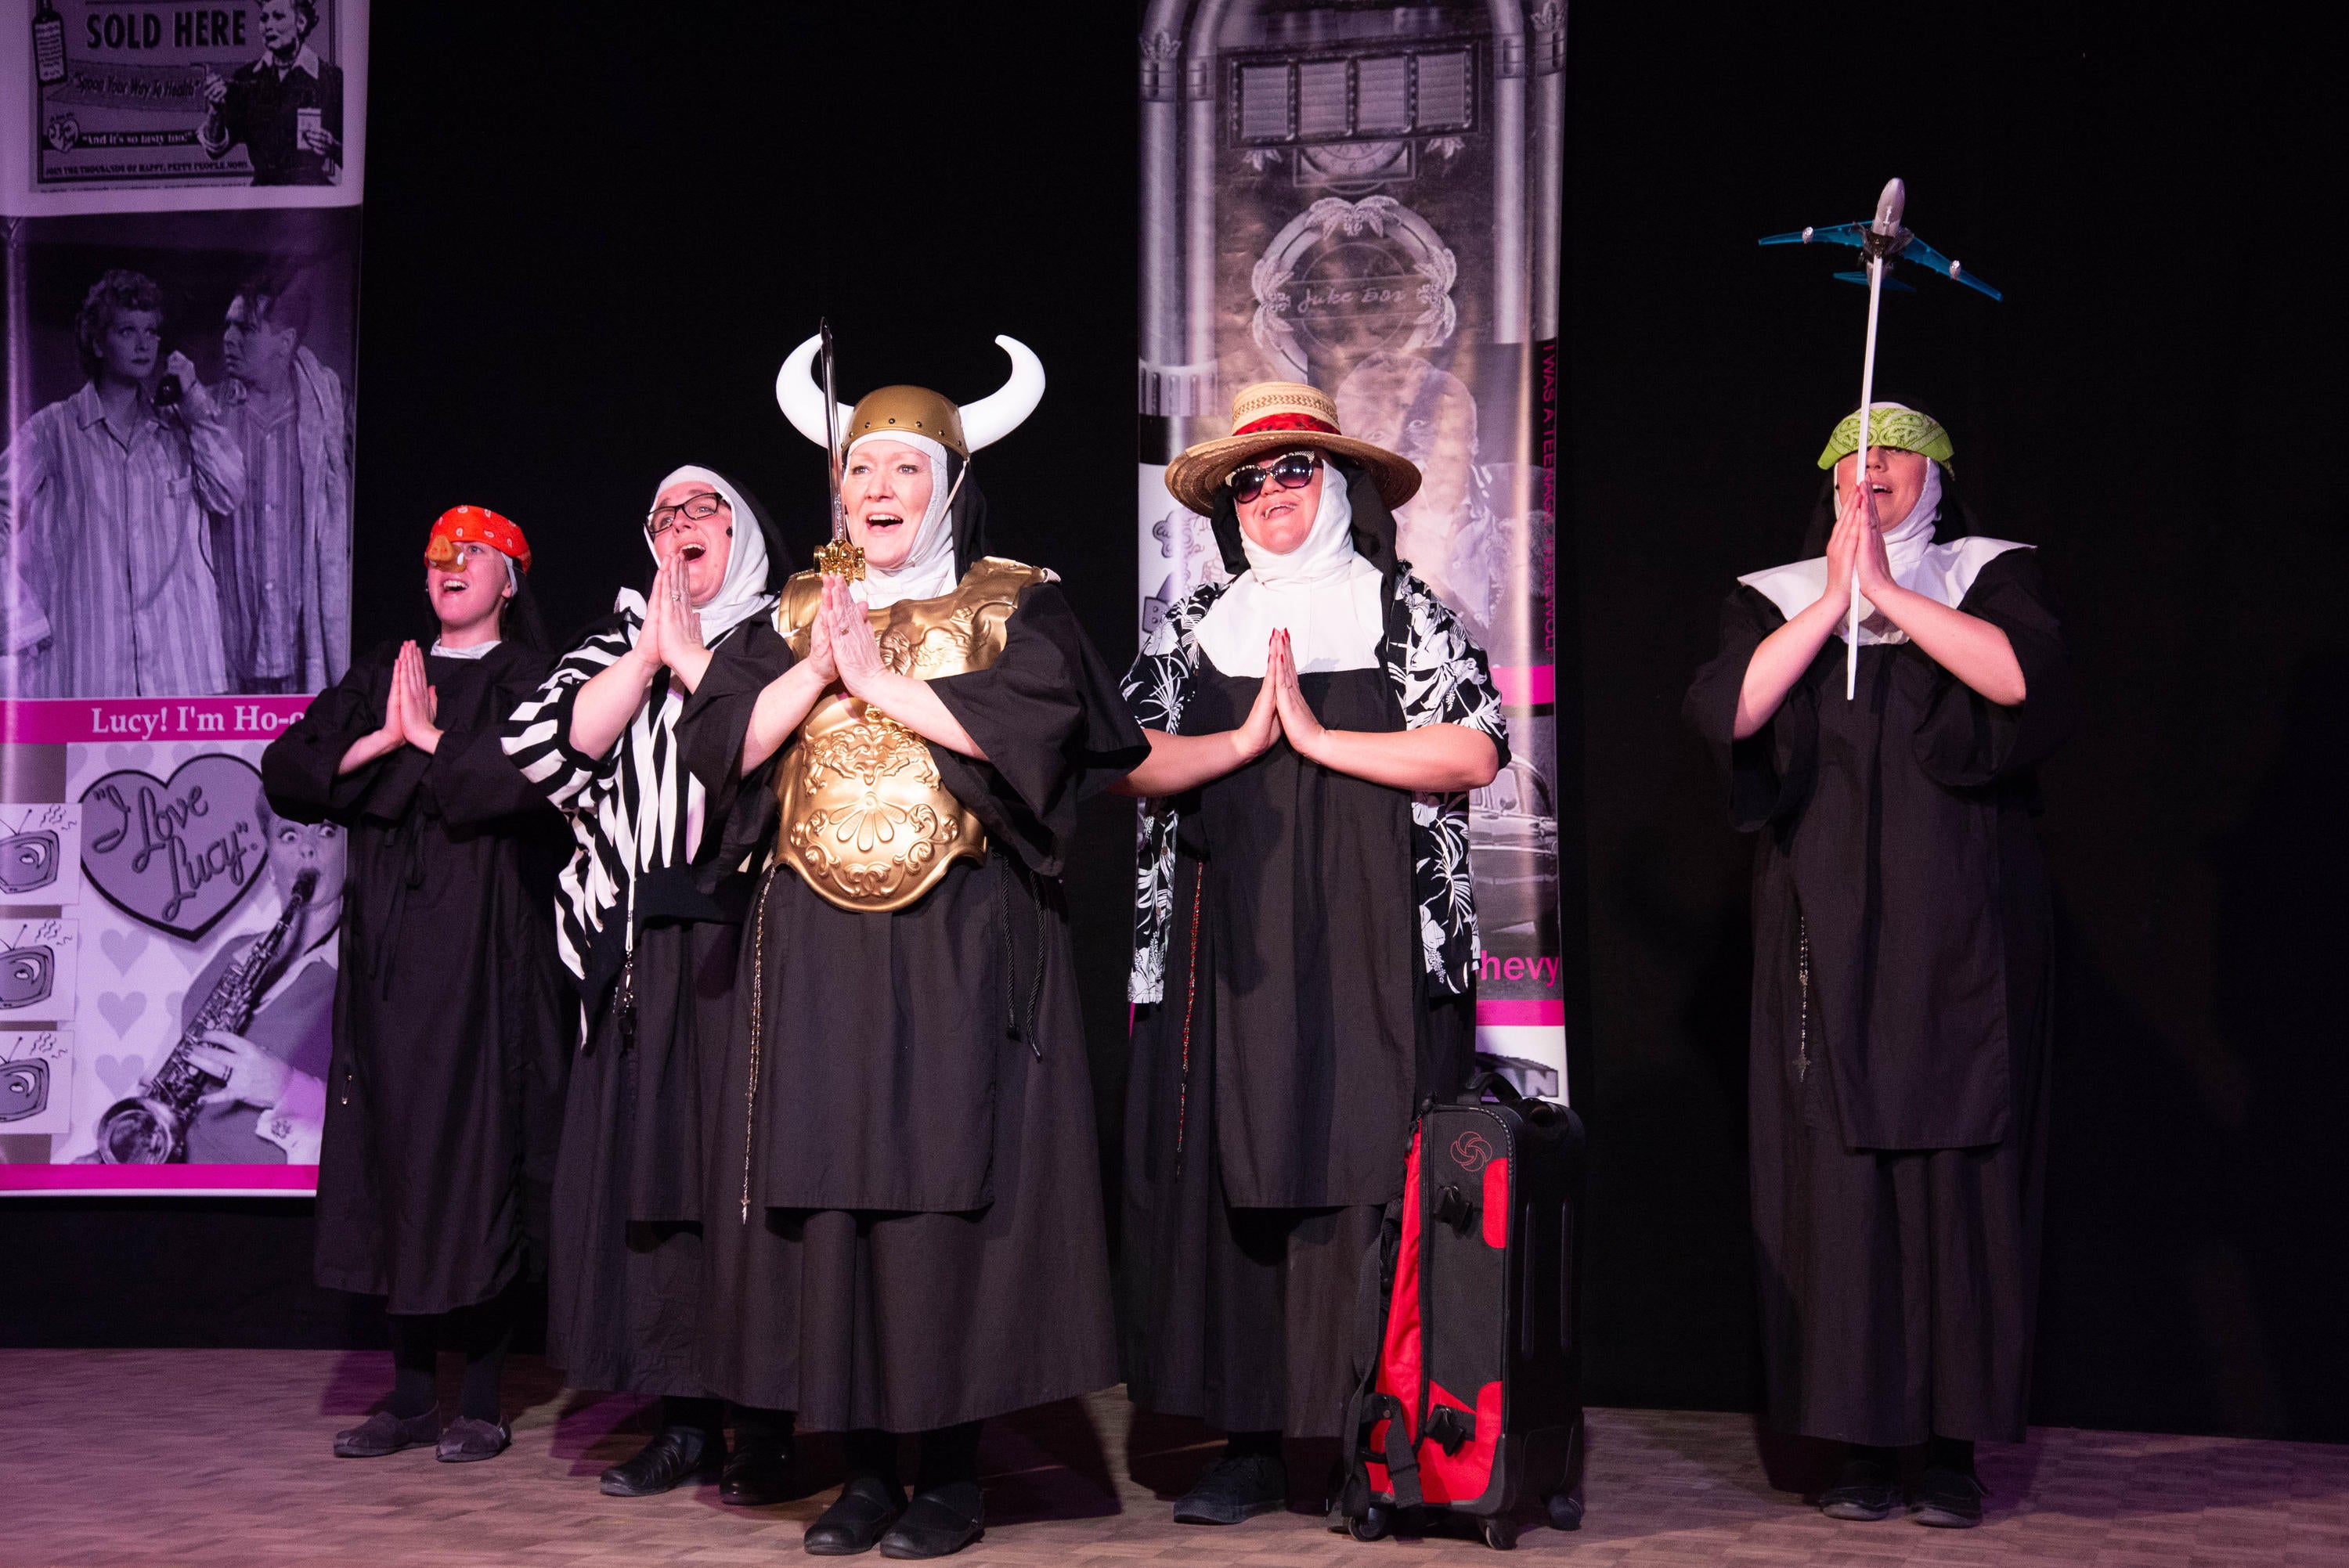 A group of actresses dressed as nuns sing on stage with props like viking horns, a model airplane, and traveling gear.